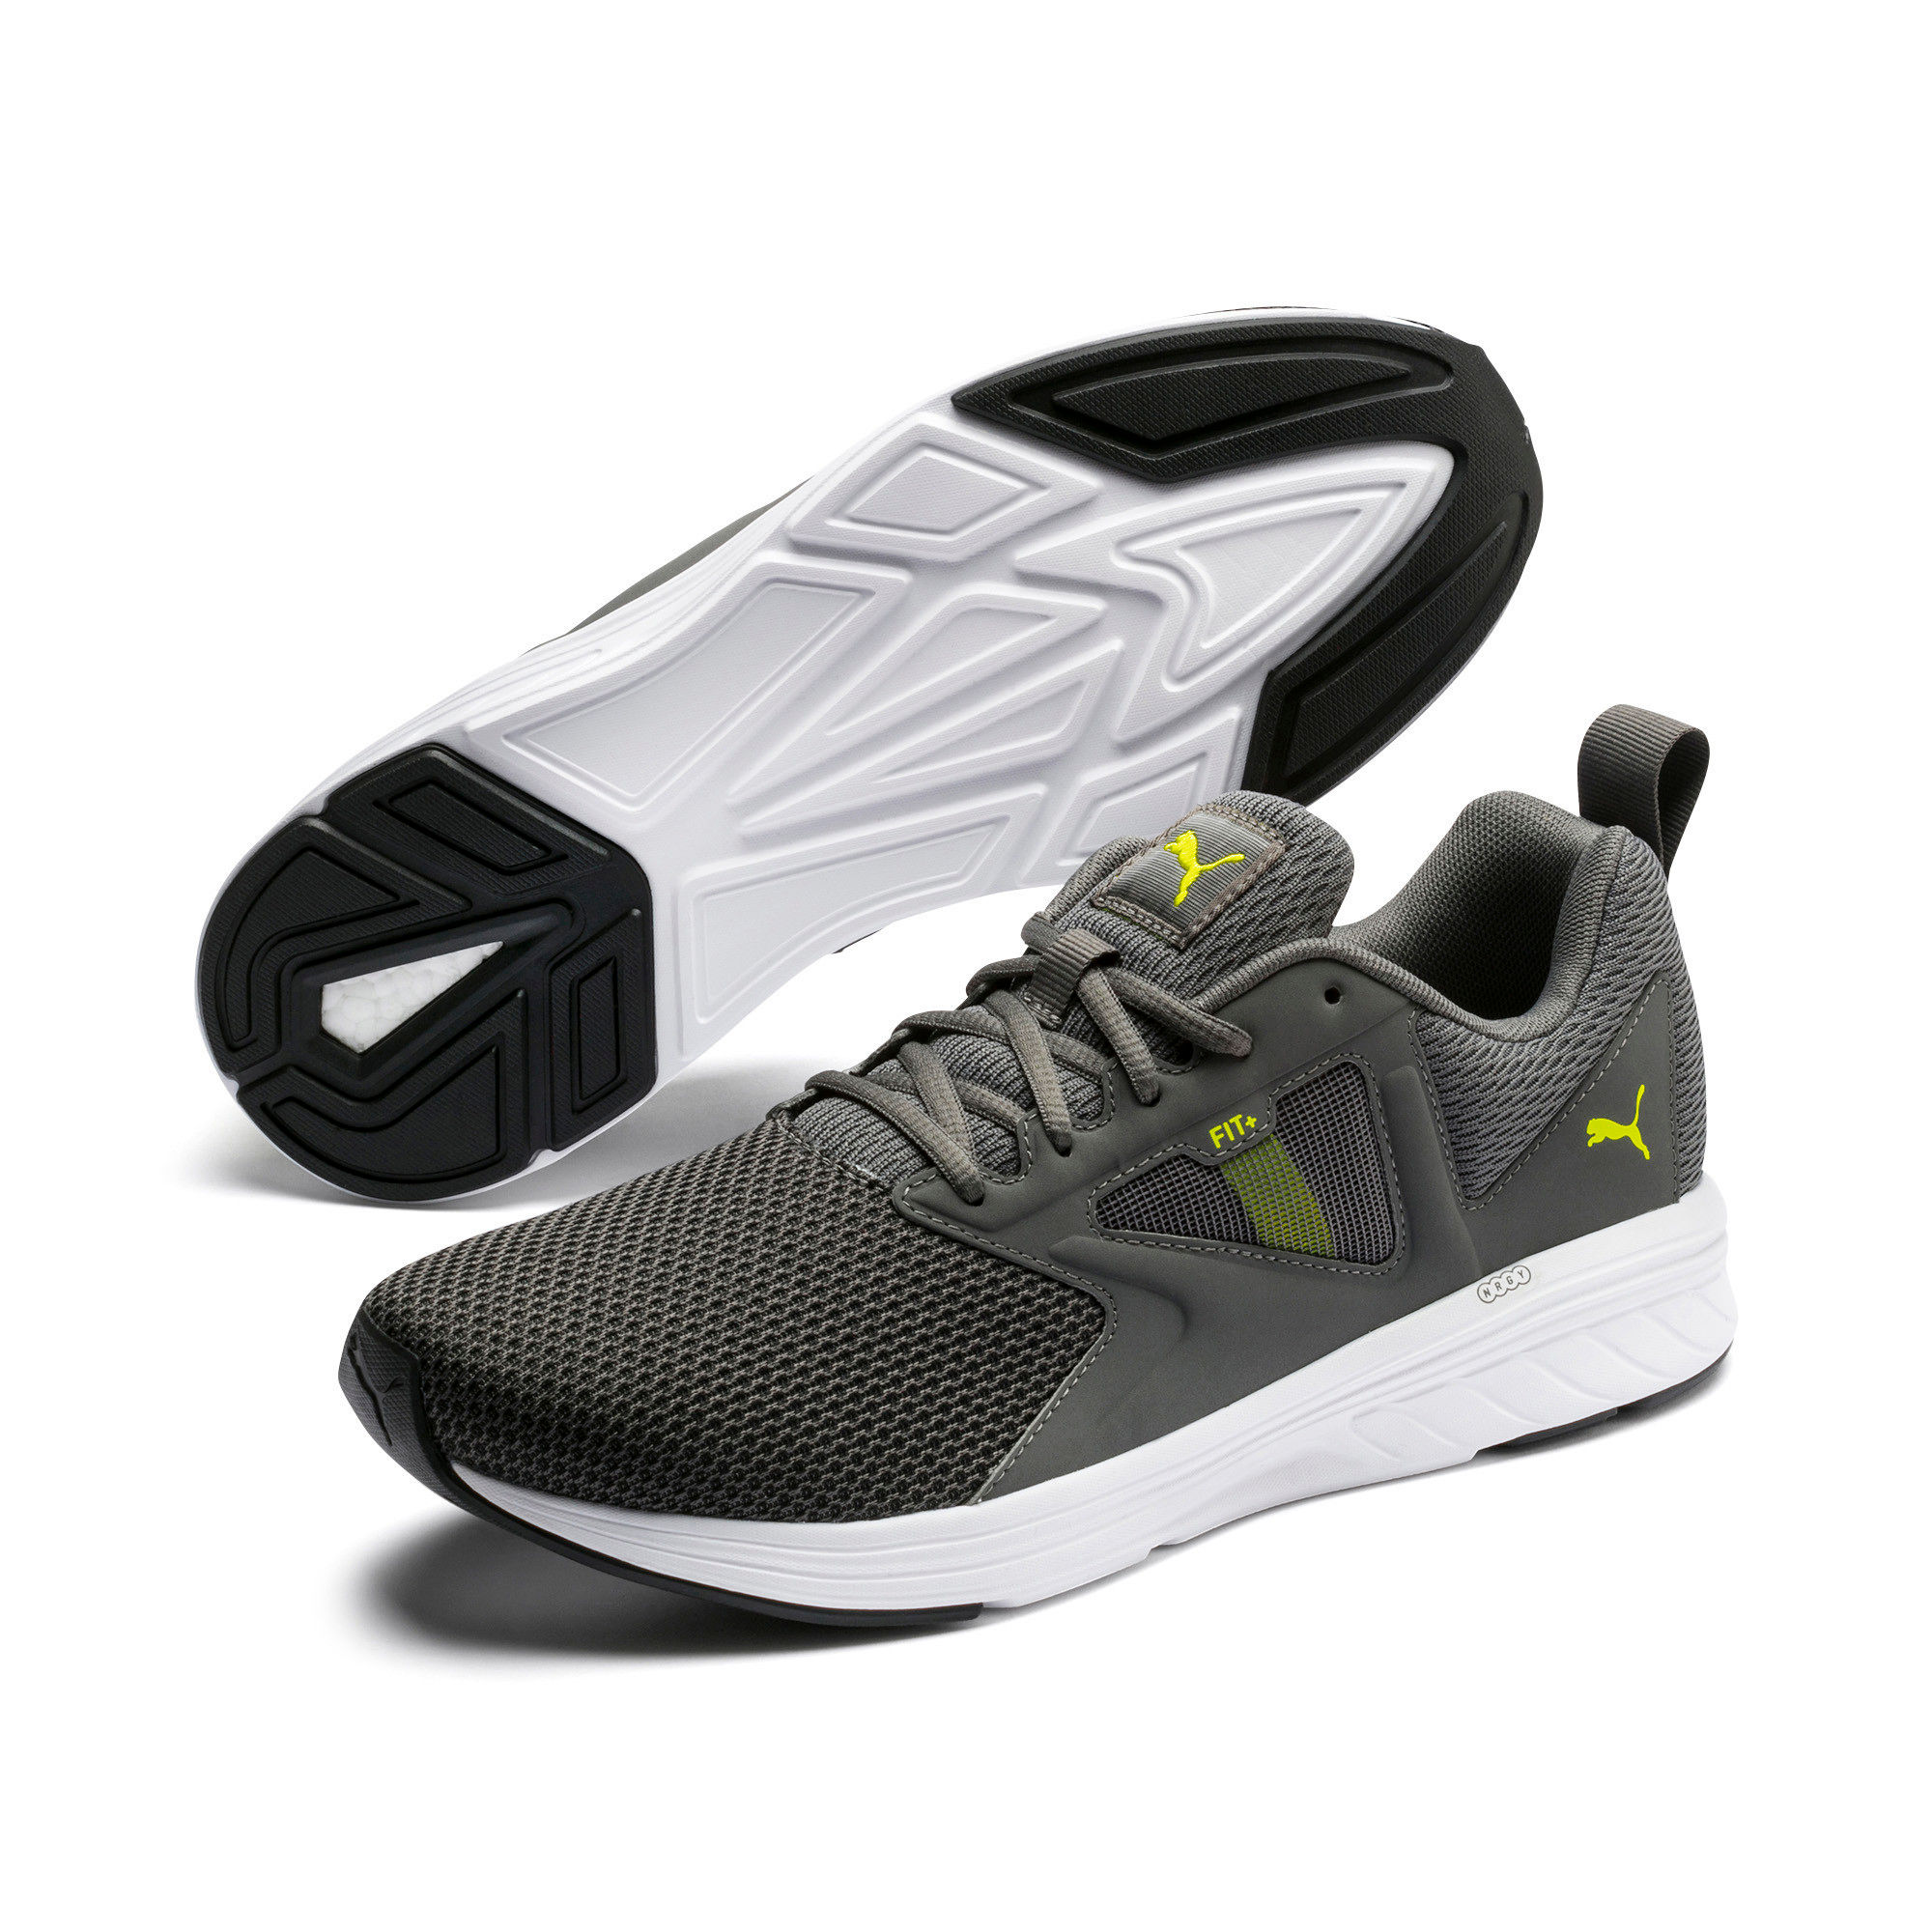 Puma NRGY Asteroid Running Gray Shoes - 6: Buy Puma NRGY Asteroid ...